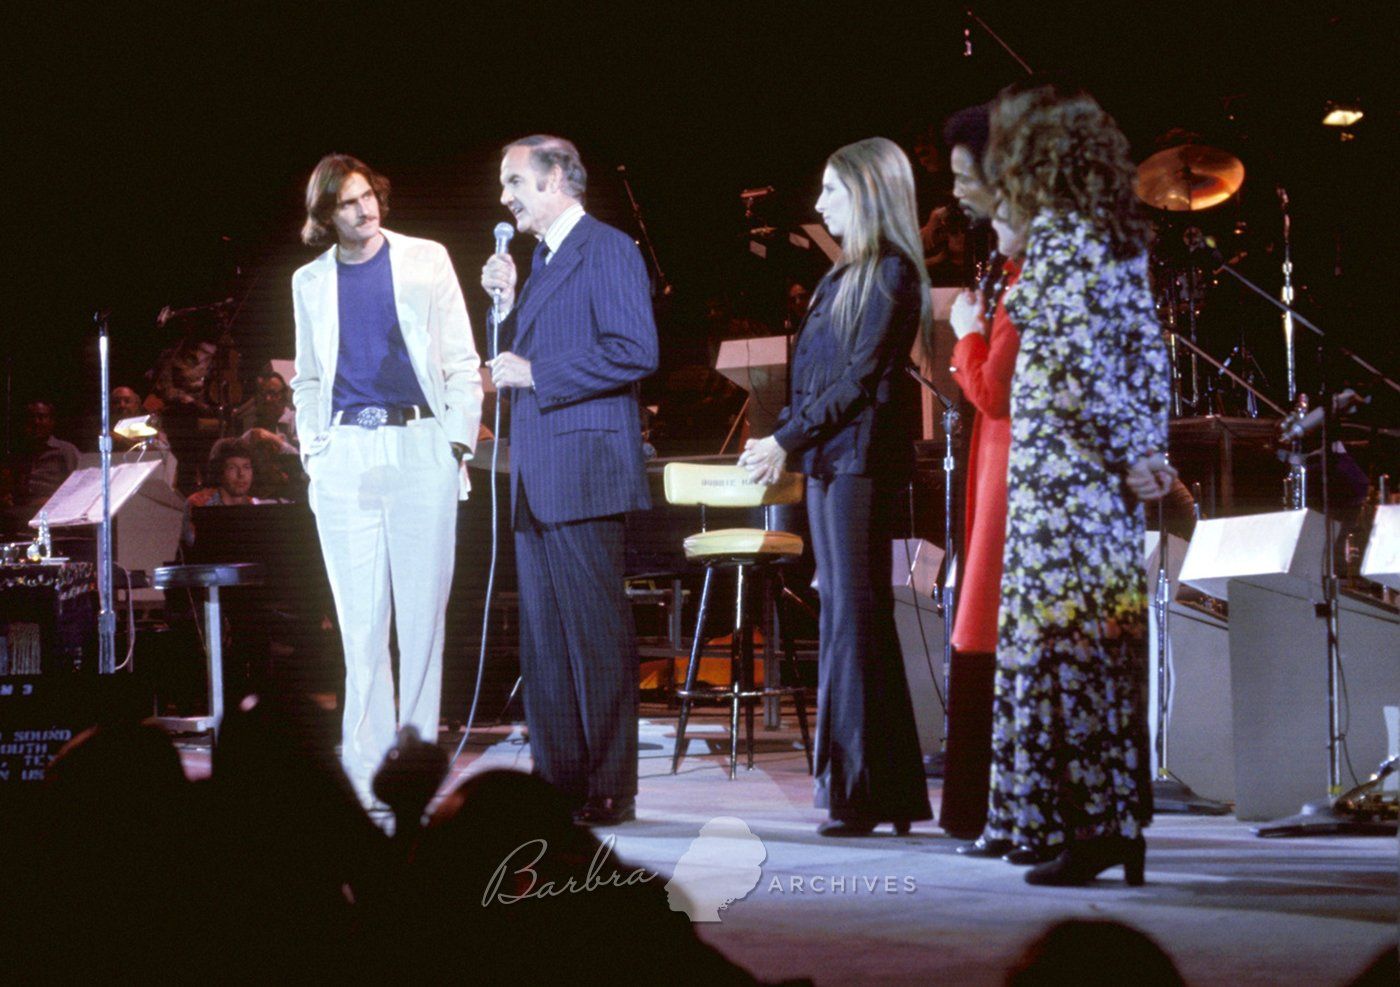 James Taylor, George McGovern, Streisand, Quincy Jones, and Carole King.